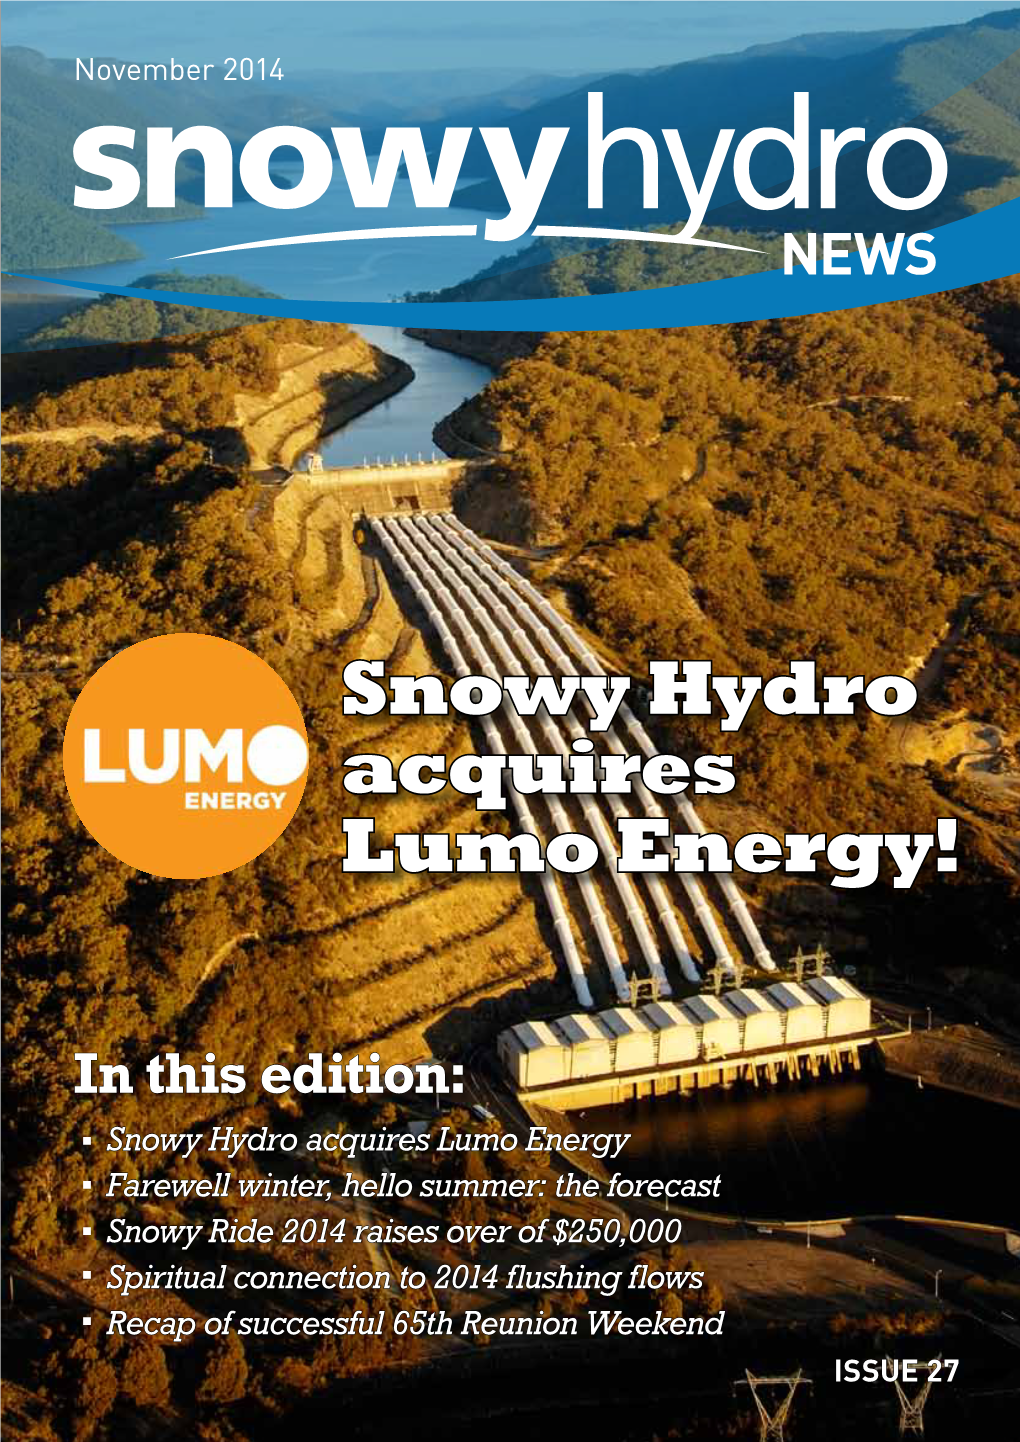 Snowy Hydro Acquires Lumo Energy! RED50403-C in This Edition